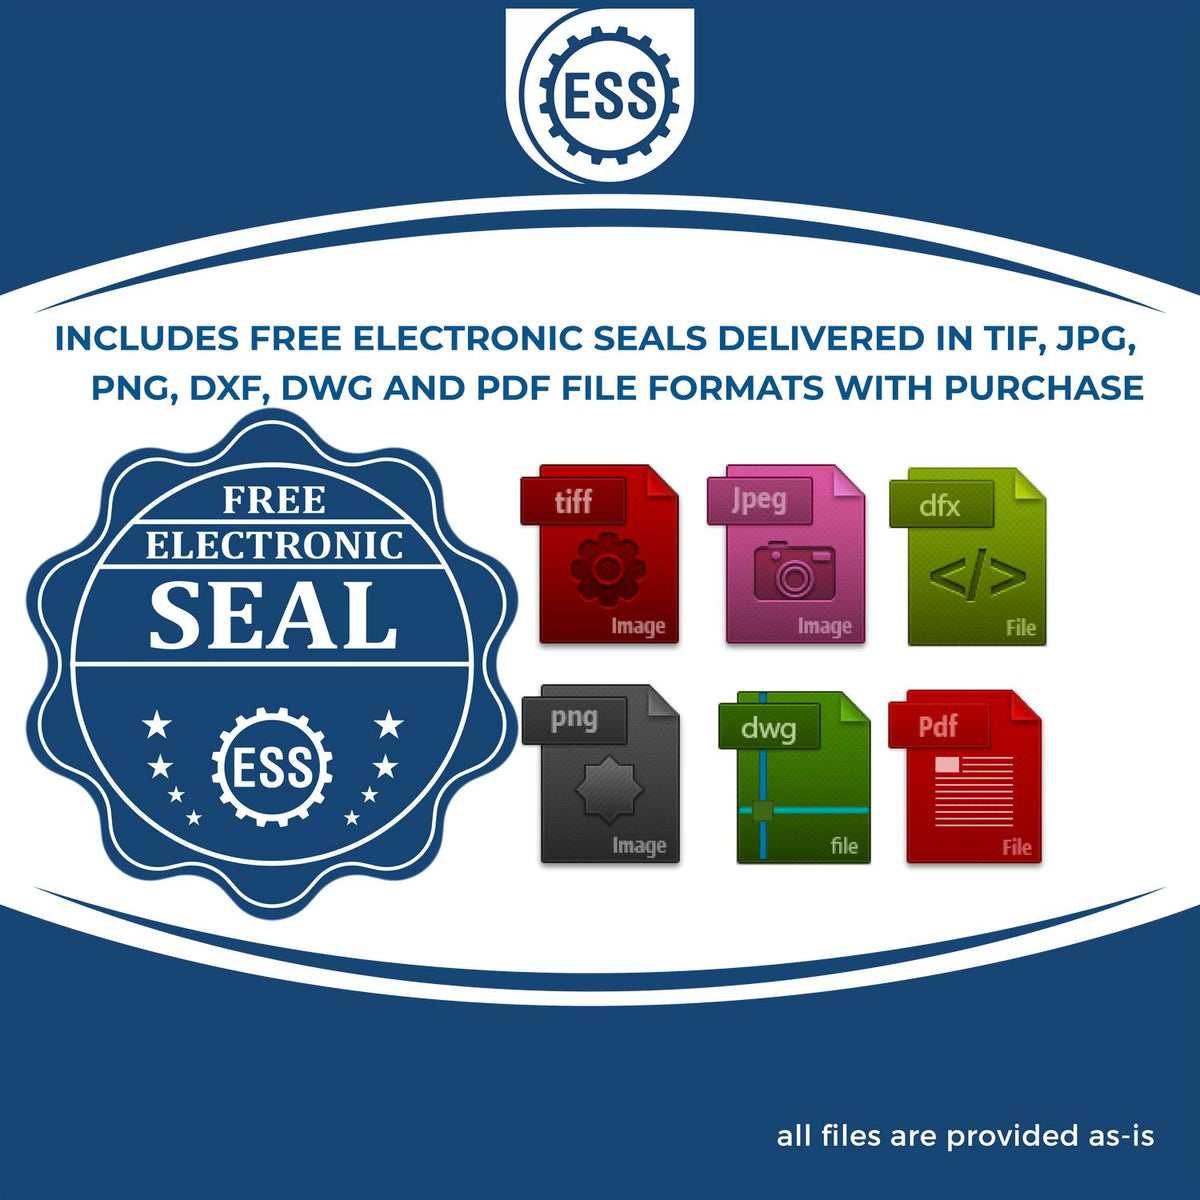 An infographic for the free electronic seal for the PSI Kentucky Notary Stamp illustrating the different file type icons such as DXF, DWG, TIF, JPG and PNG.